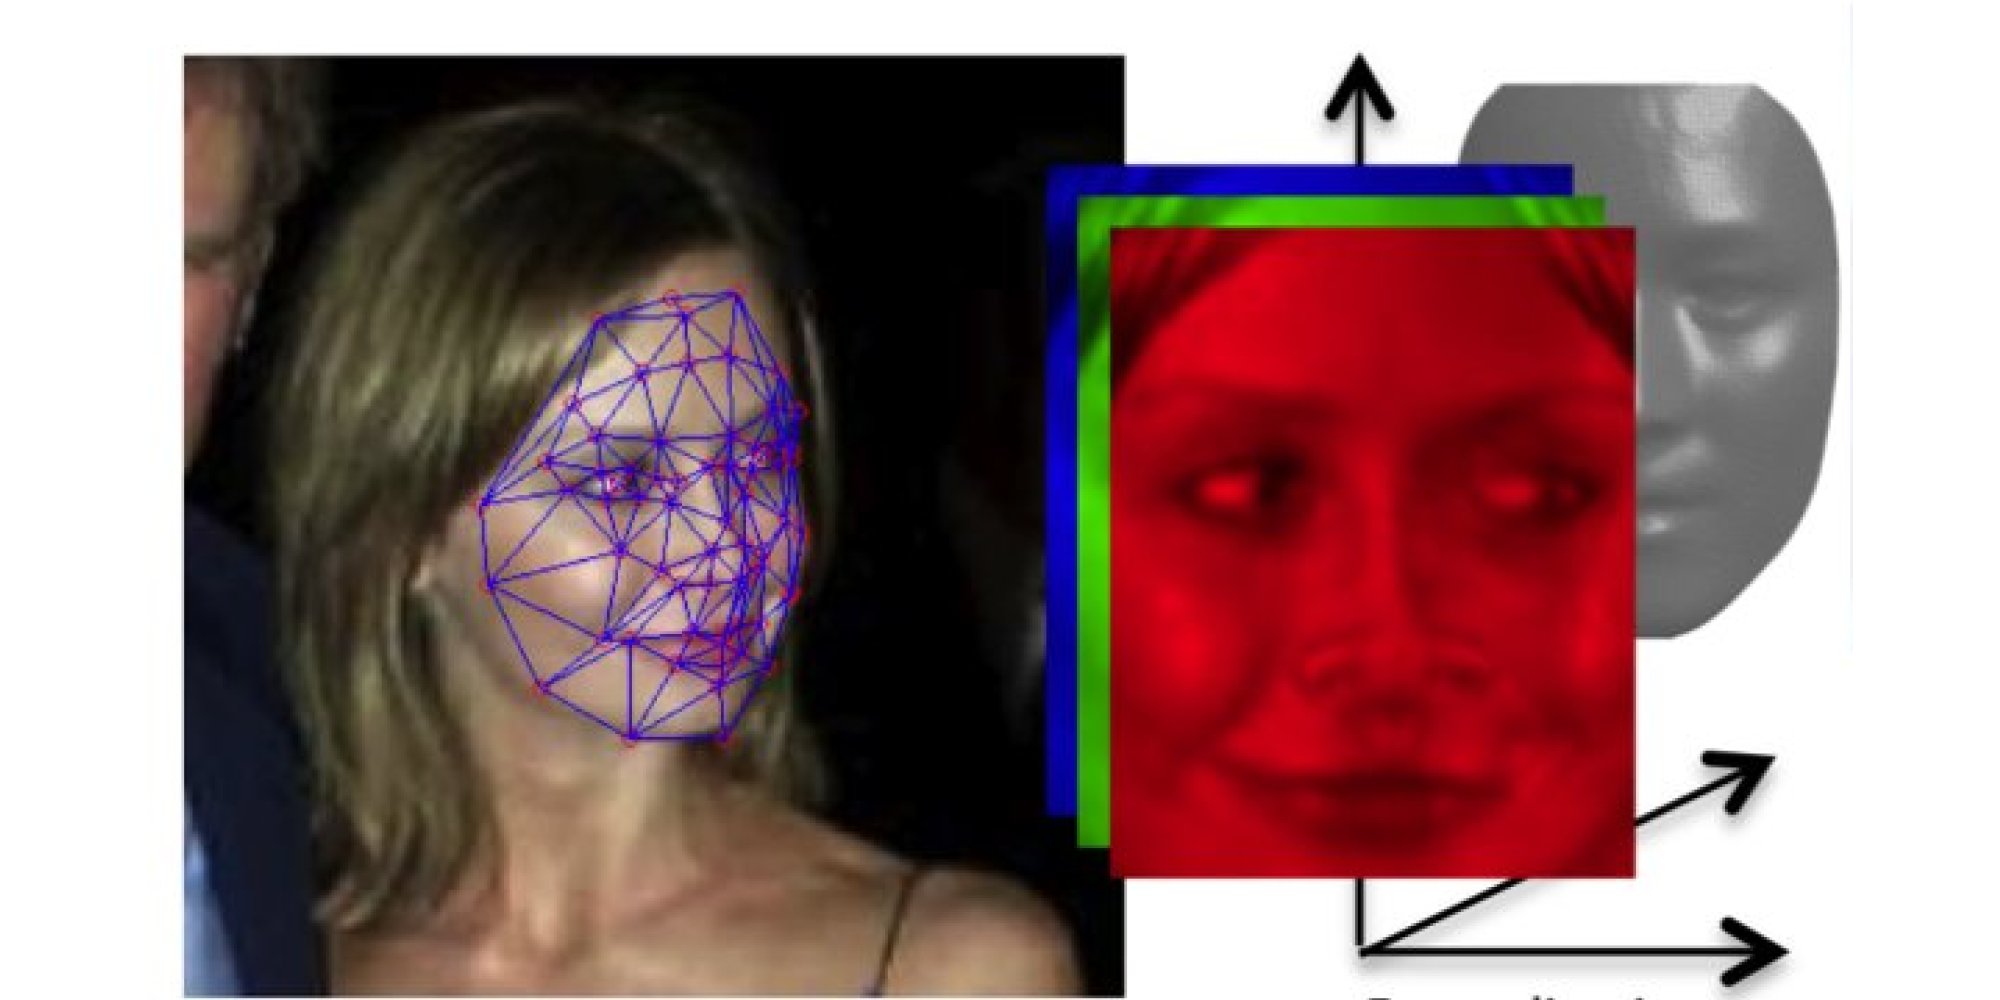 Facebook's New 'DeepFace' Program Is Just As Creepy As It Sounds | HuffPost2000 x 1000